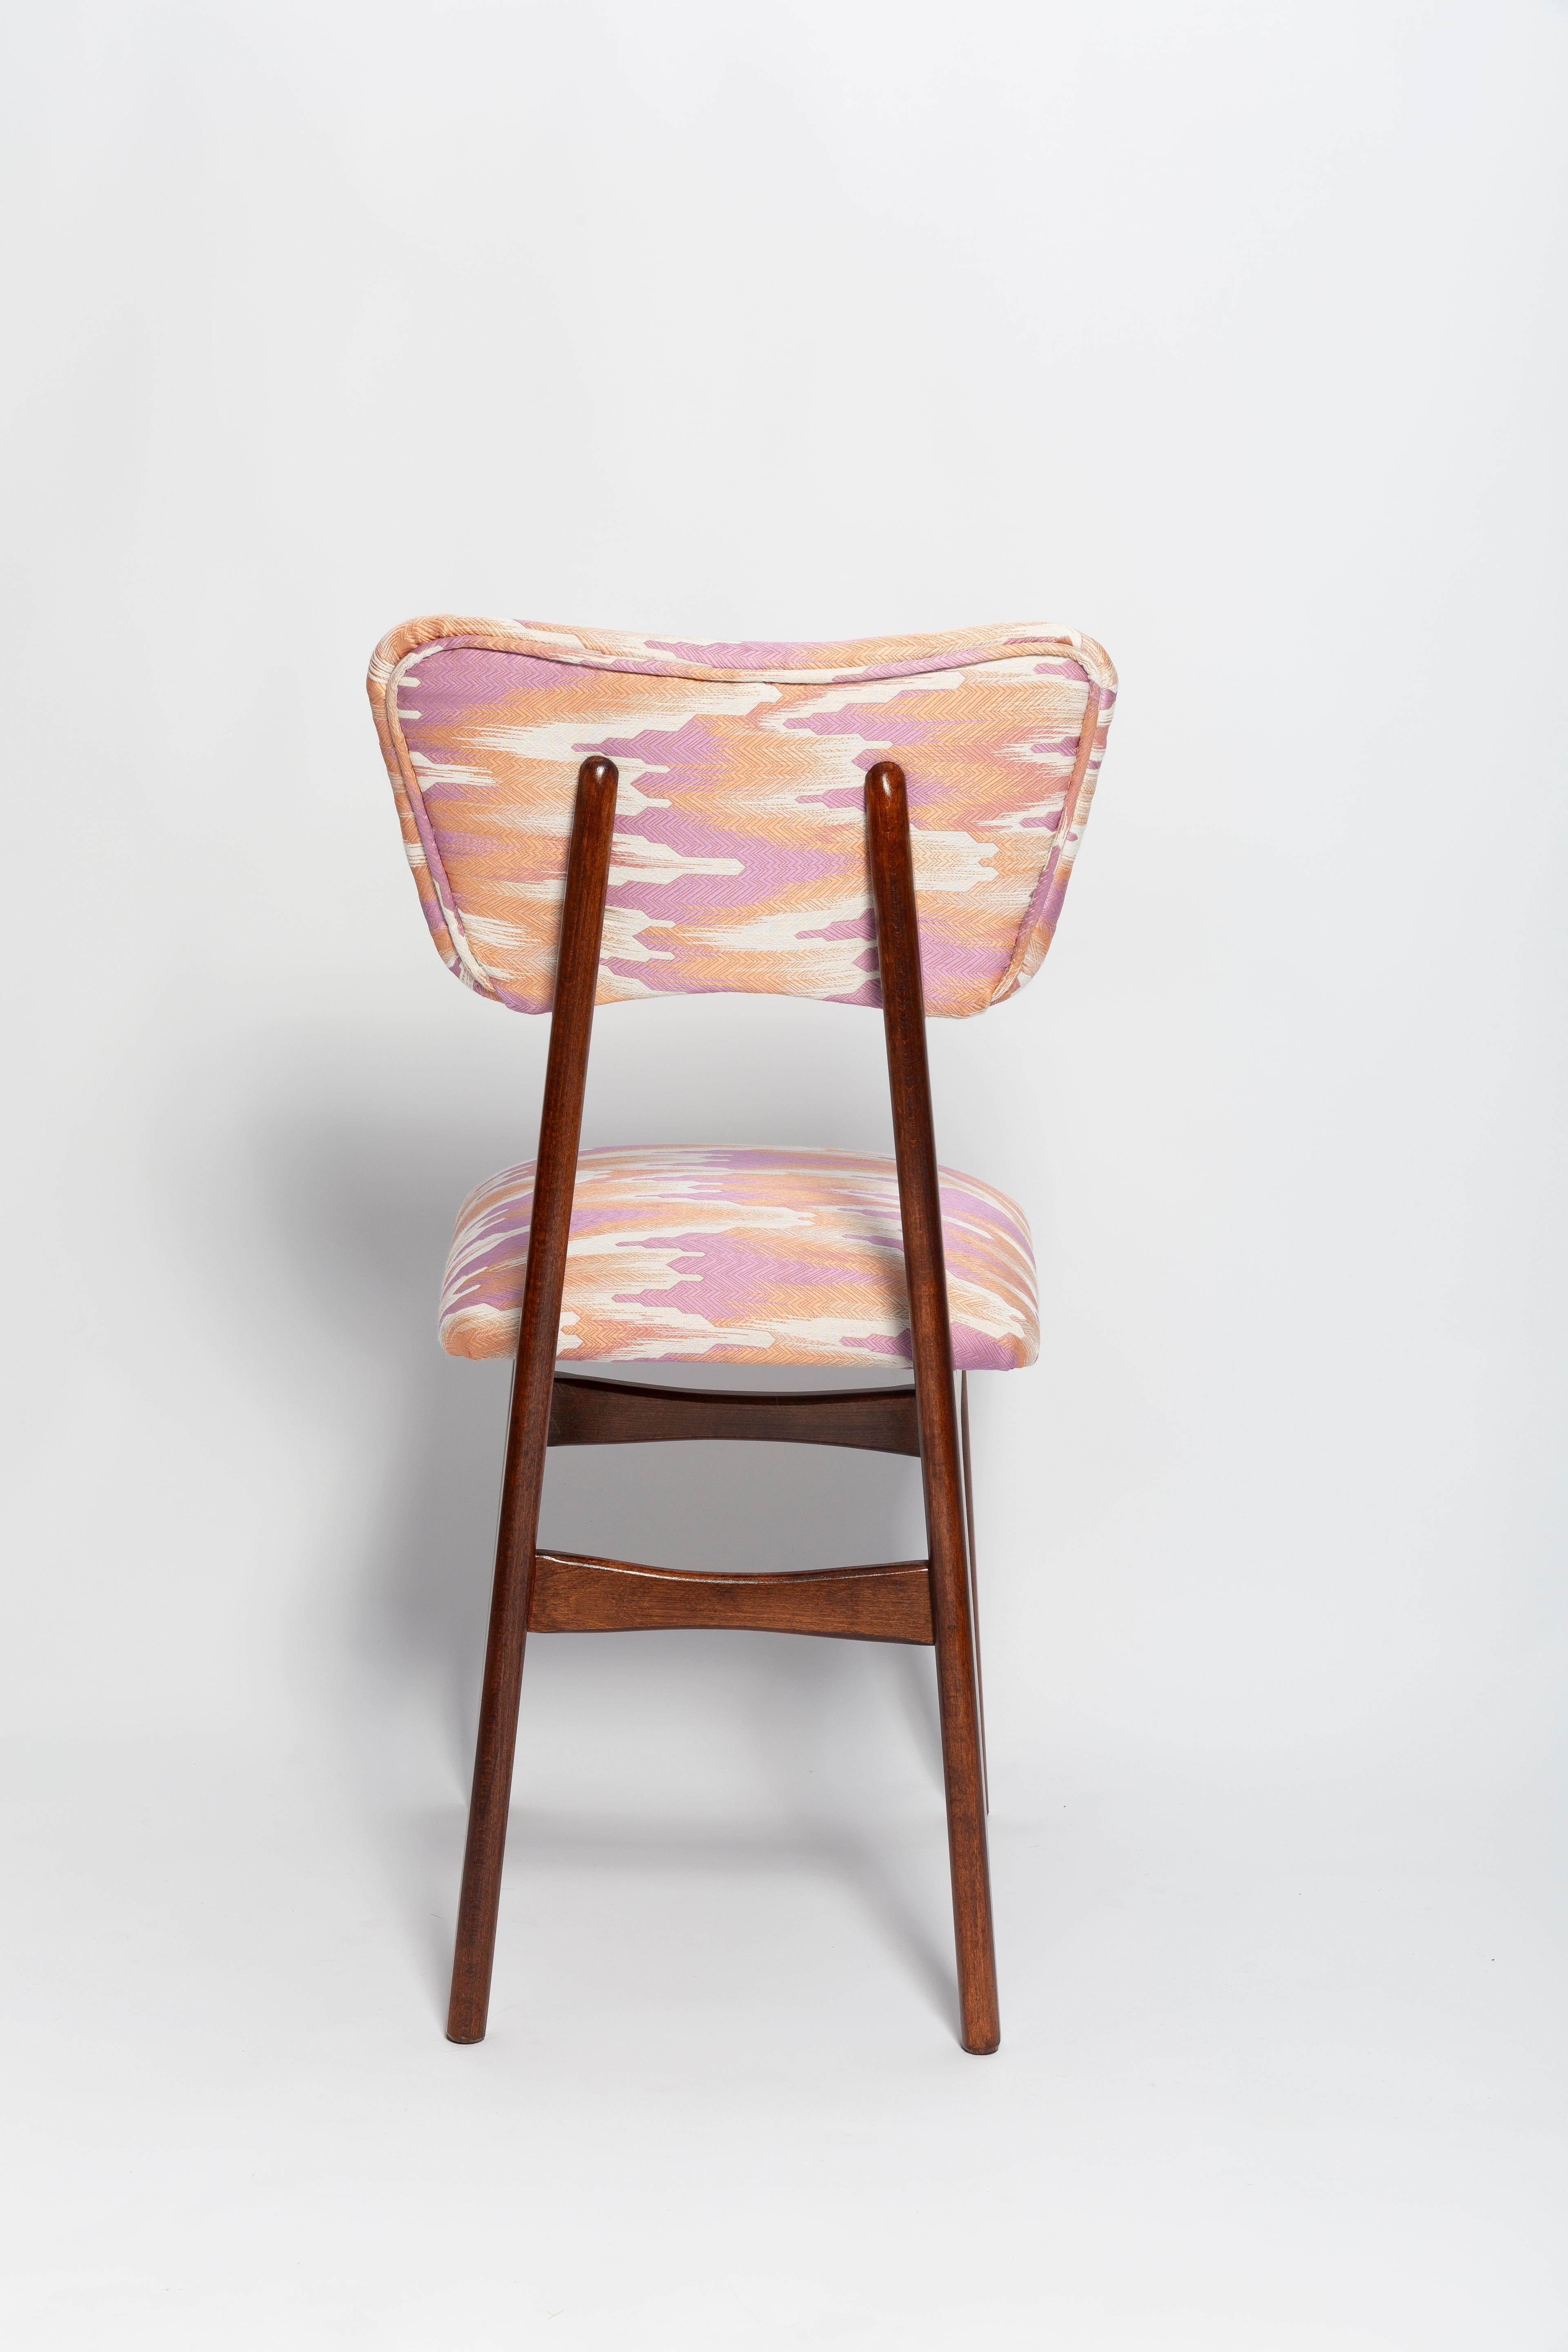 Fabric Mid Century Butterfly Chair, Pink Fandango Jacquard, Dark Wood, Europe, 1960s For Sale